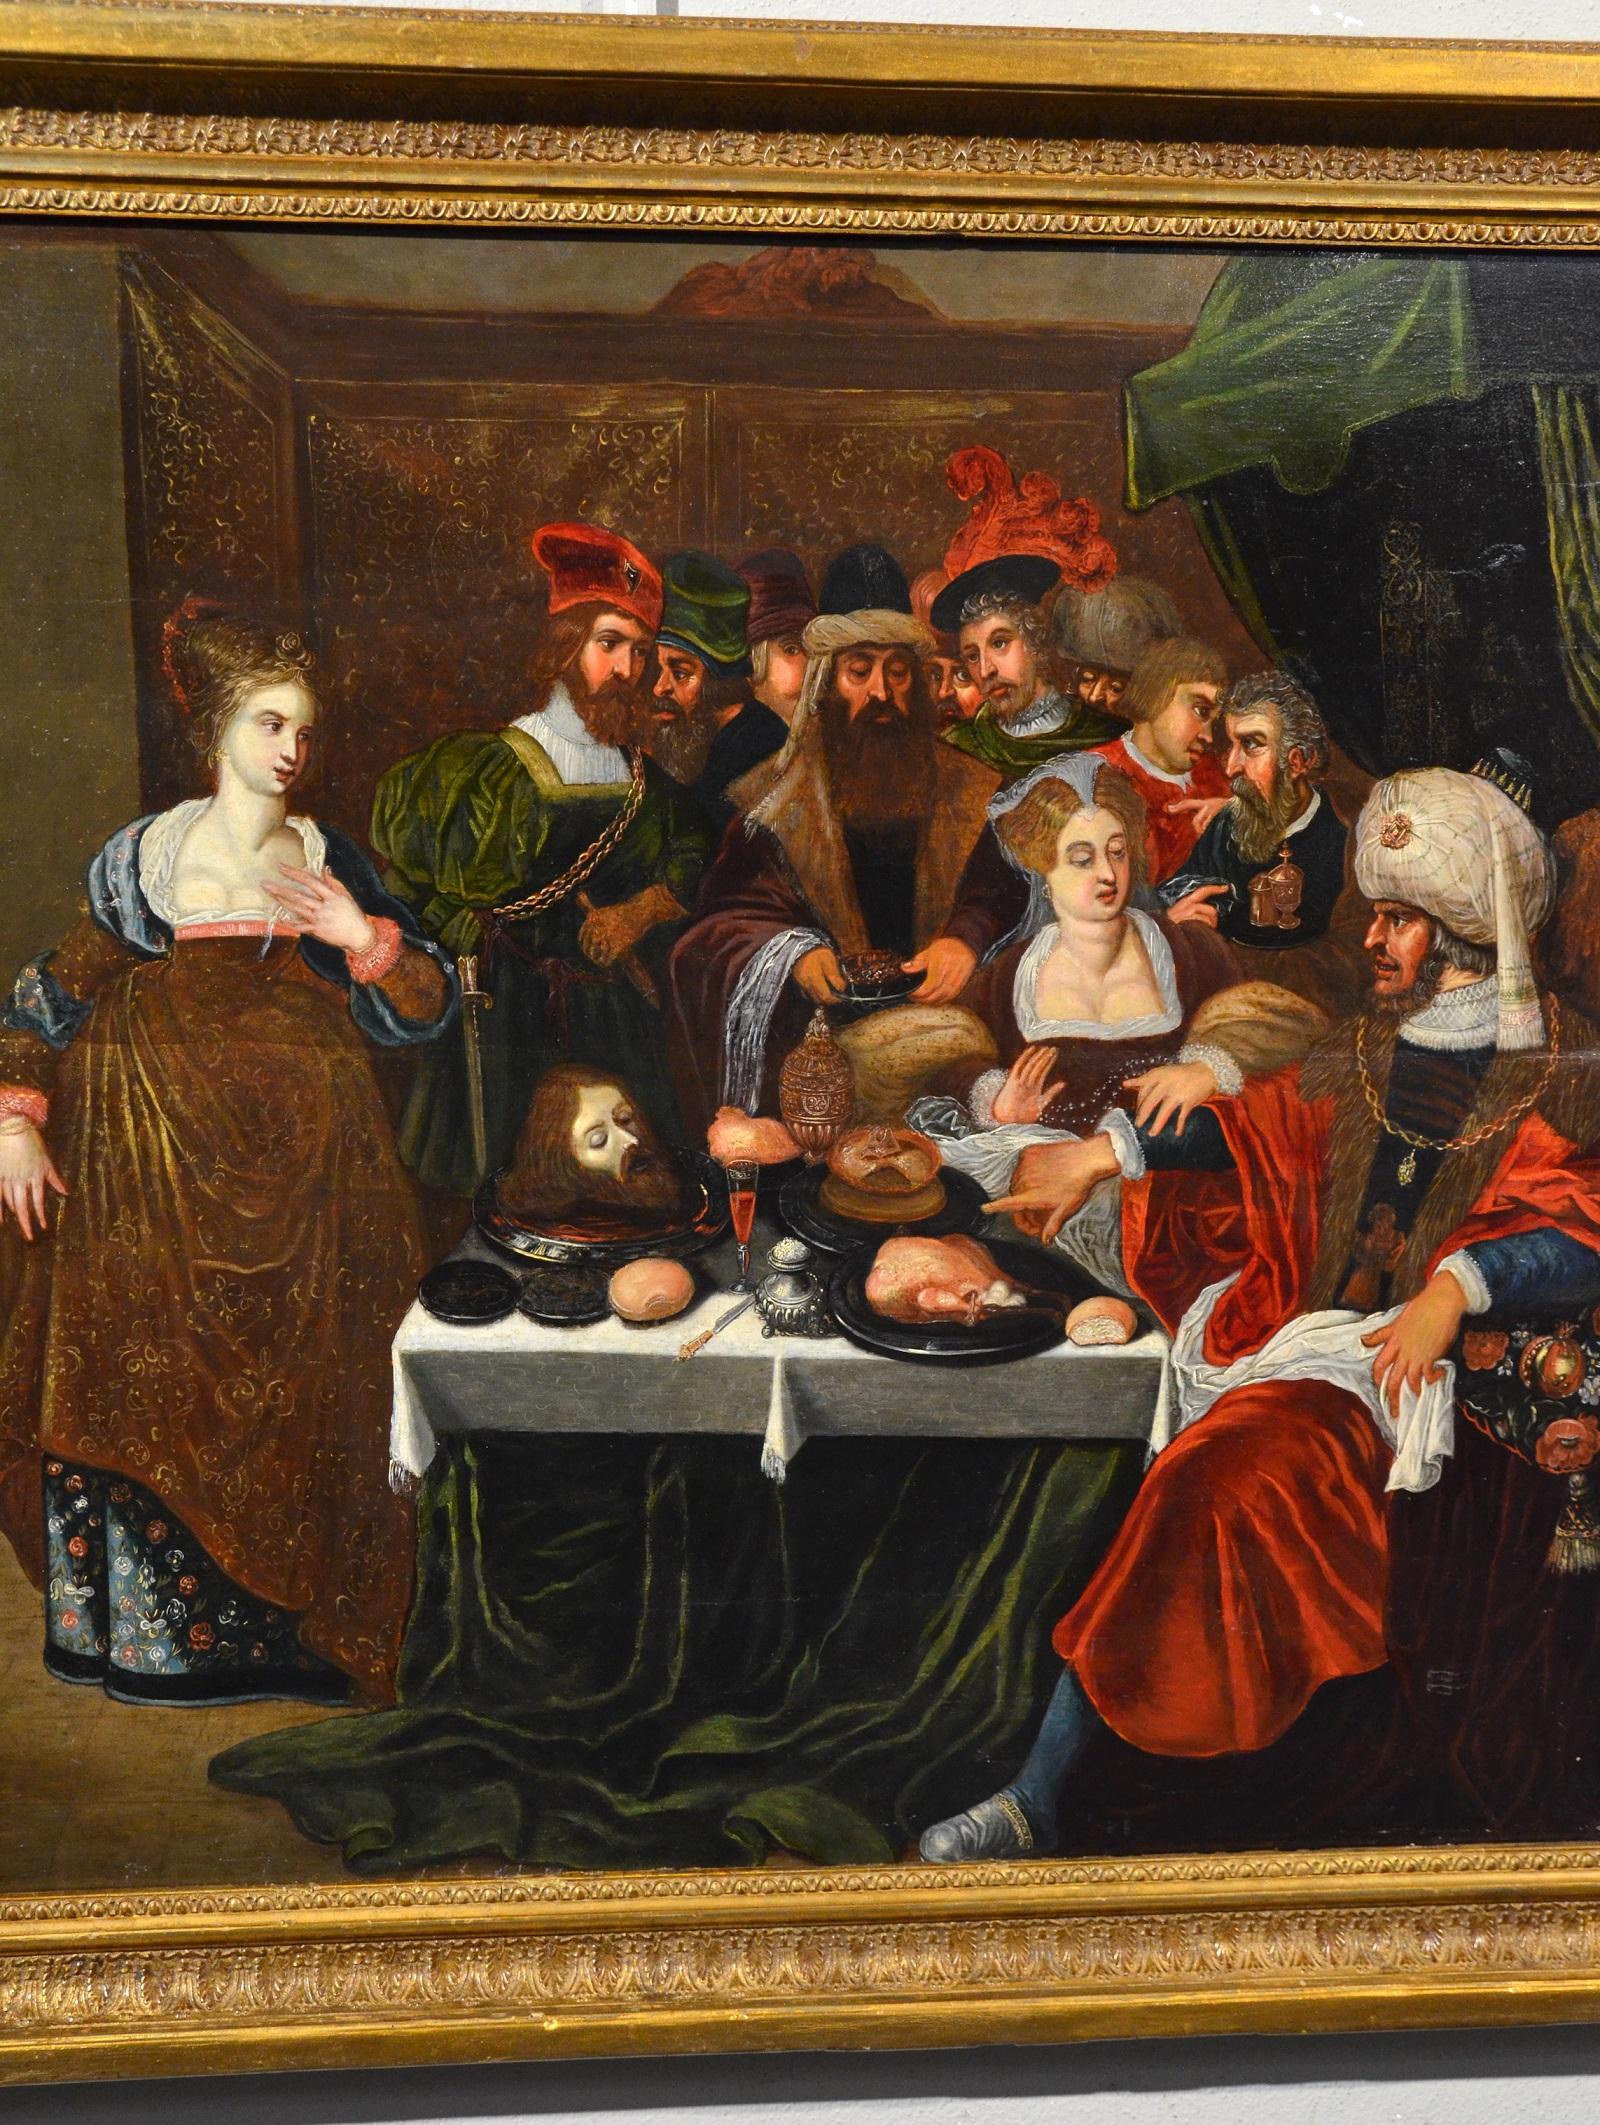 Banquet Attrib to Van Den Hoecke Religious Oil on Table Old Master 17th Century - Old Masters Painting by Gaspar van den Hoecke (Antwerp, 1585 - 1648)